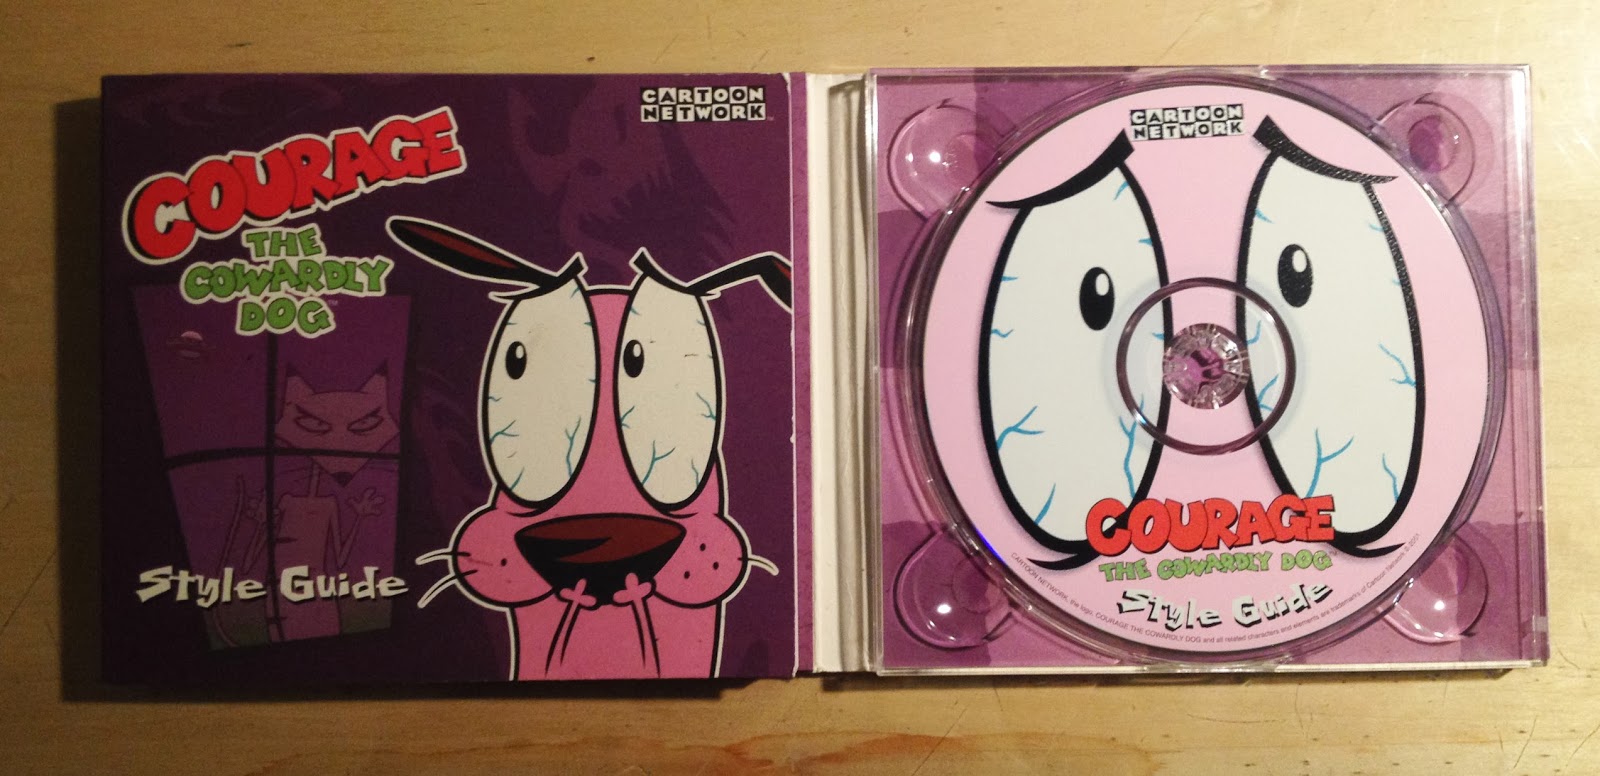 warburtonlabs: COURAGE THE COWARDLY DOG STYLE